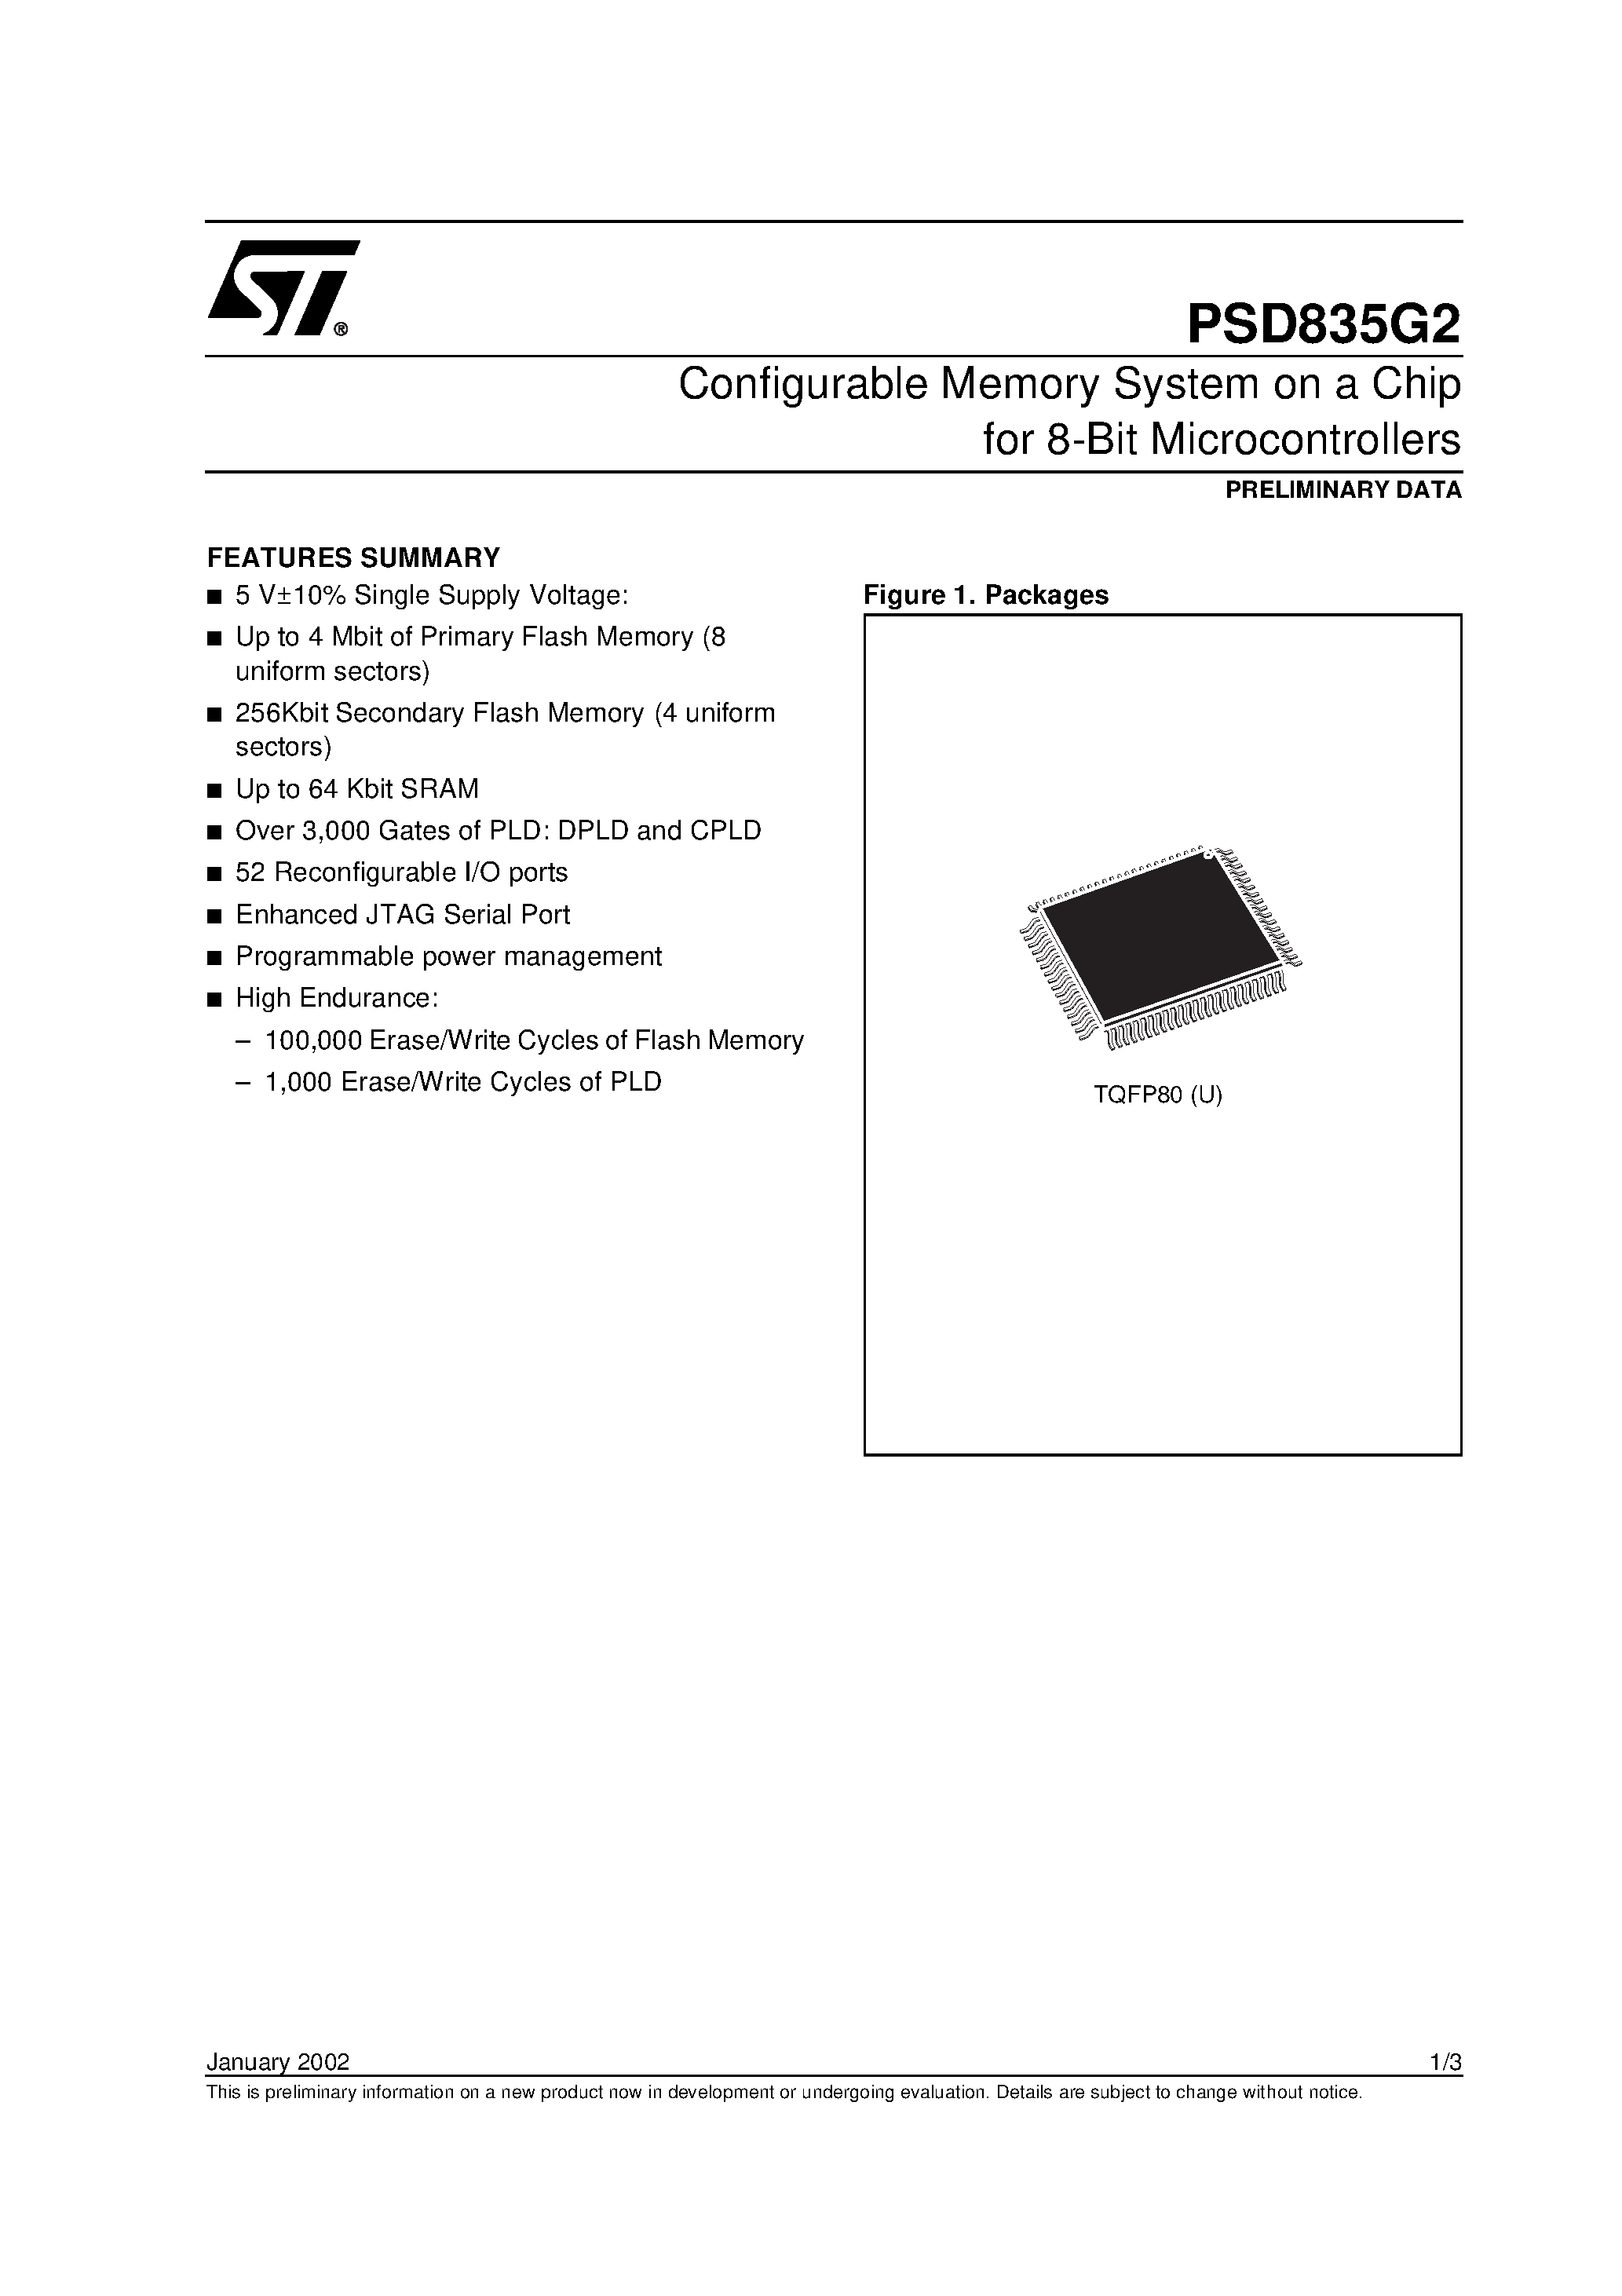 Datasheet PSD835F2-A-15B81I - Configurable Memory System on a Chip for 8-Bit Microcontrollers page 1